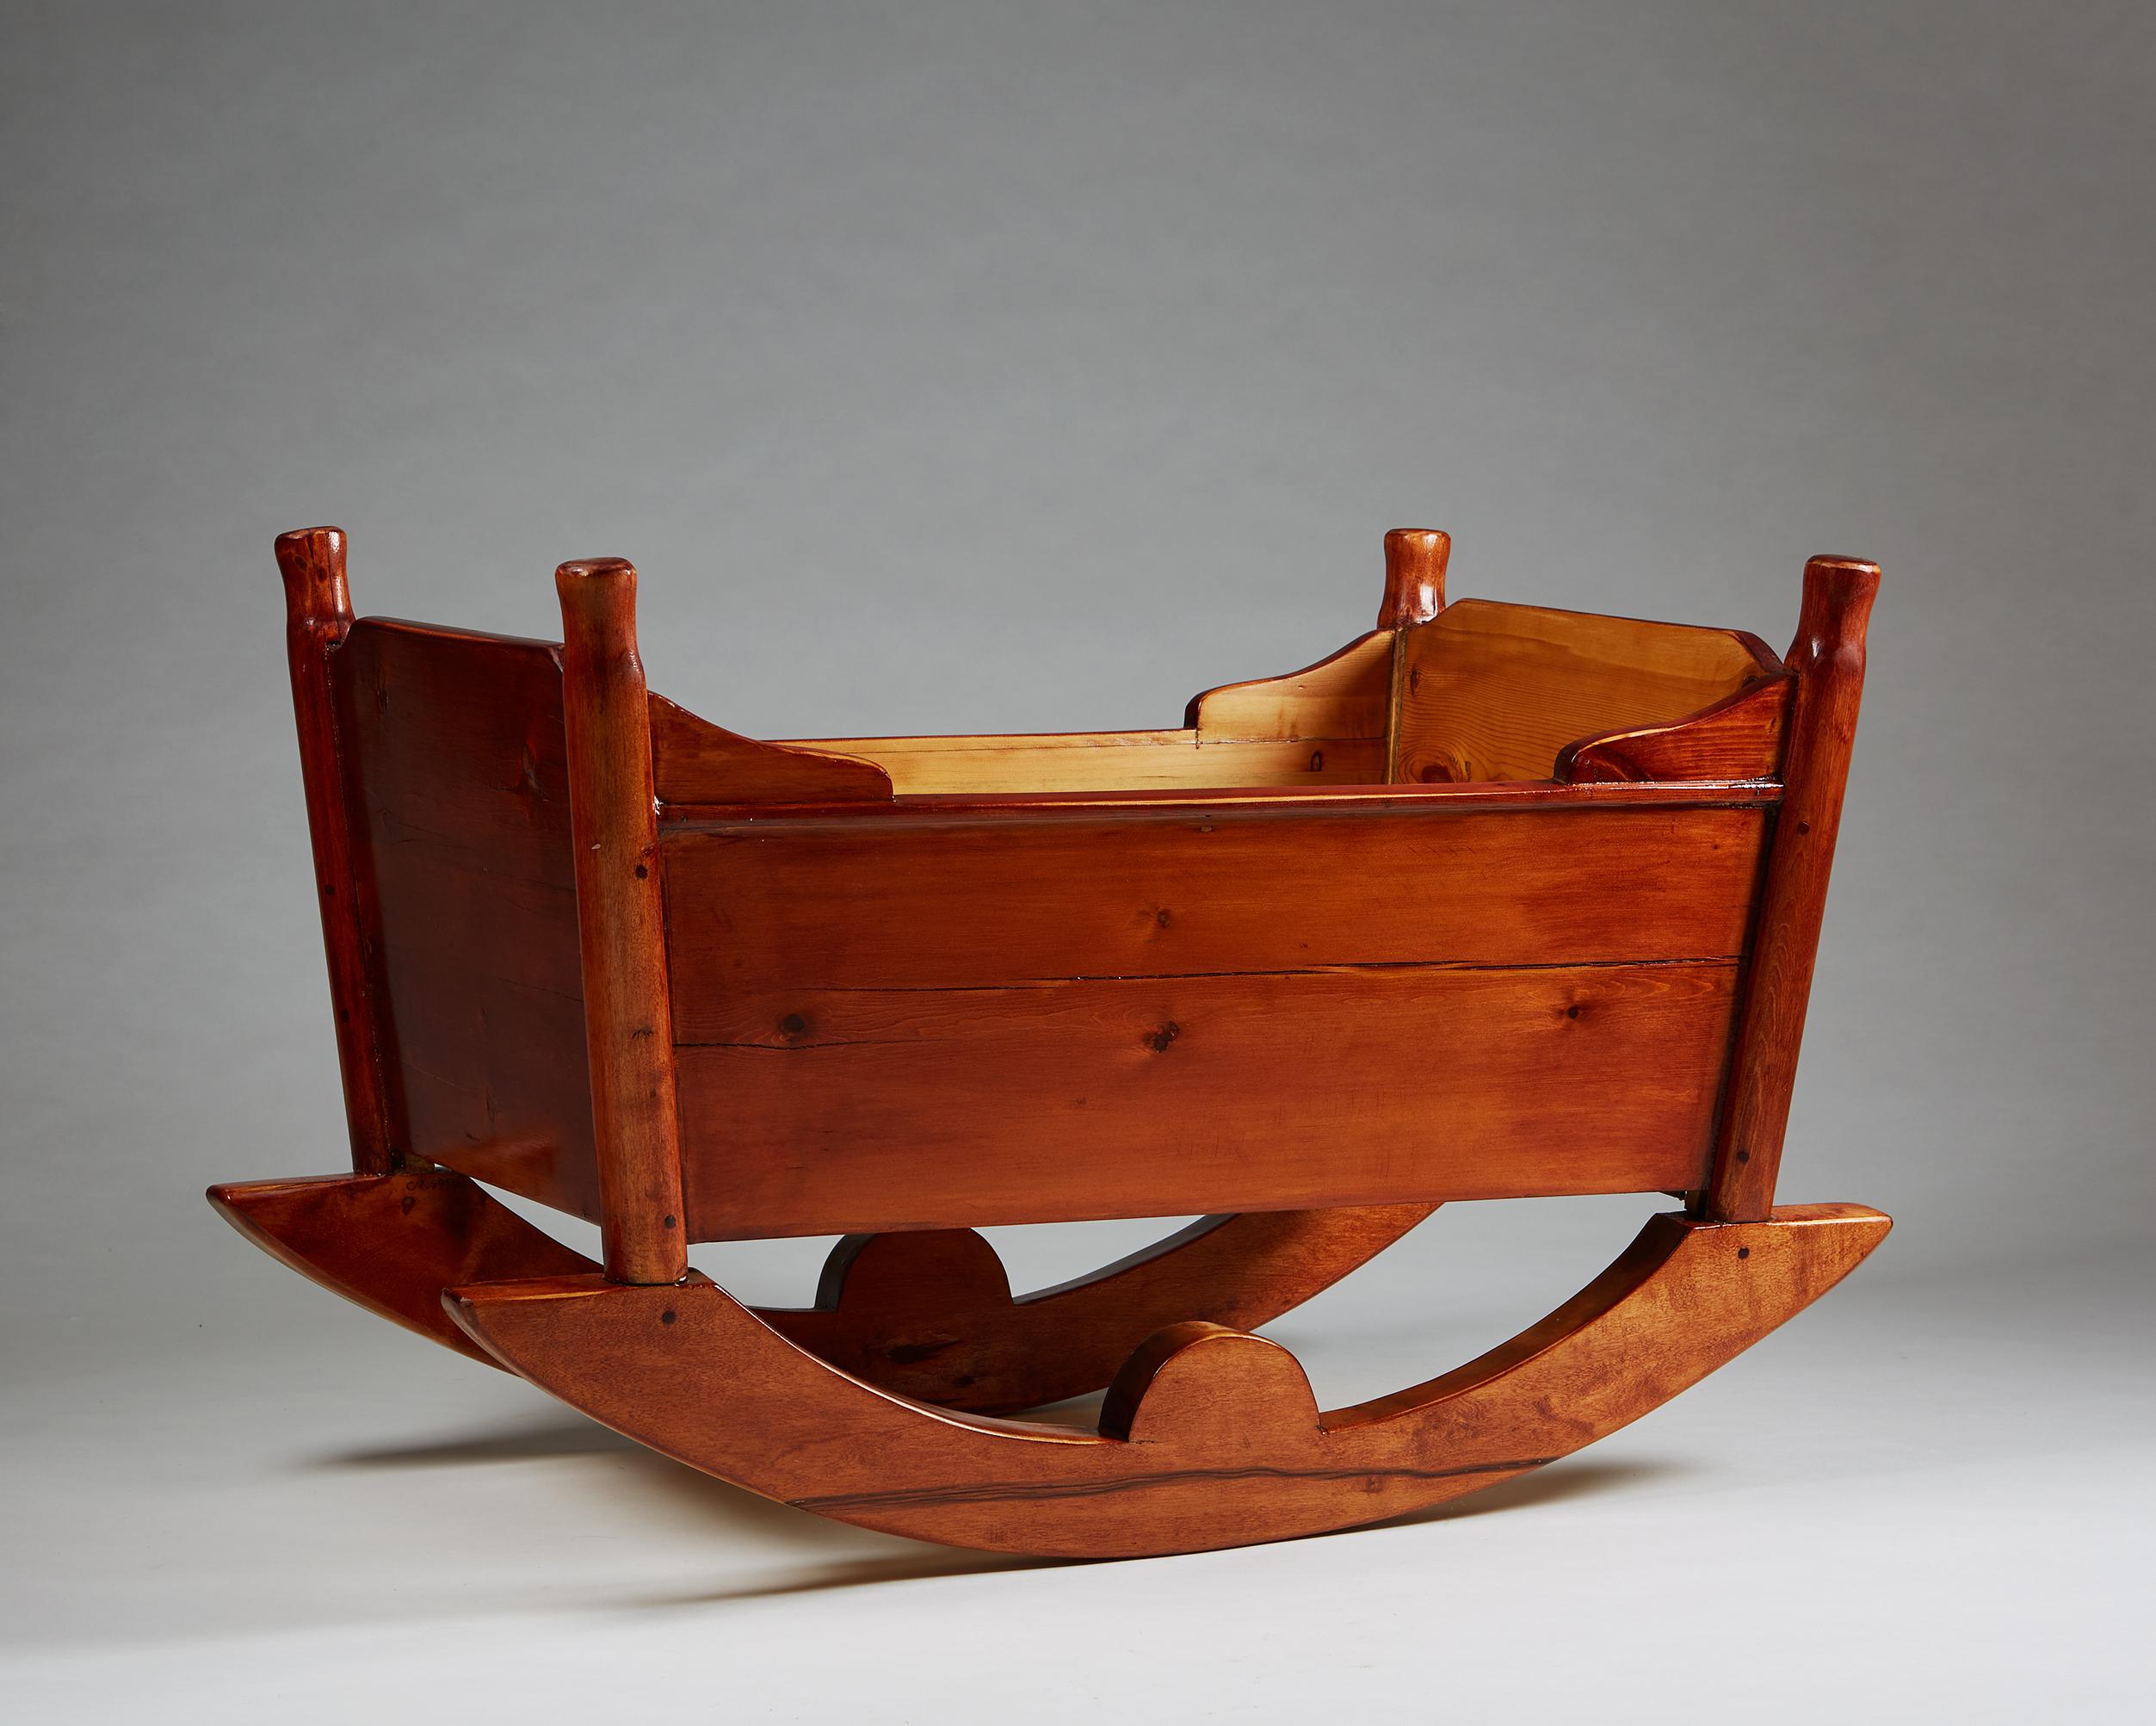 Crib designed by Carl Malmsten,
Sweden, 1924.

Stained pine.

Carl Malmsten was a renowned Swedish furniture designer and architect who lived from 1888 to 1972. He is considered one of Sweden's most influential designers of the 20th